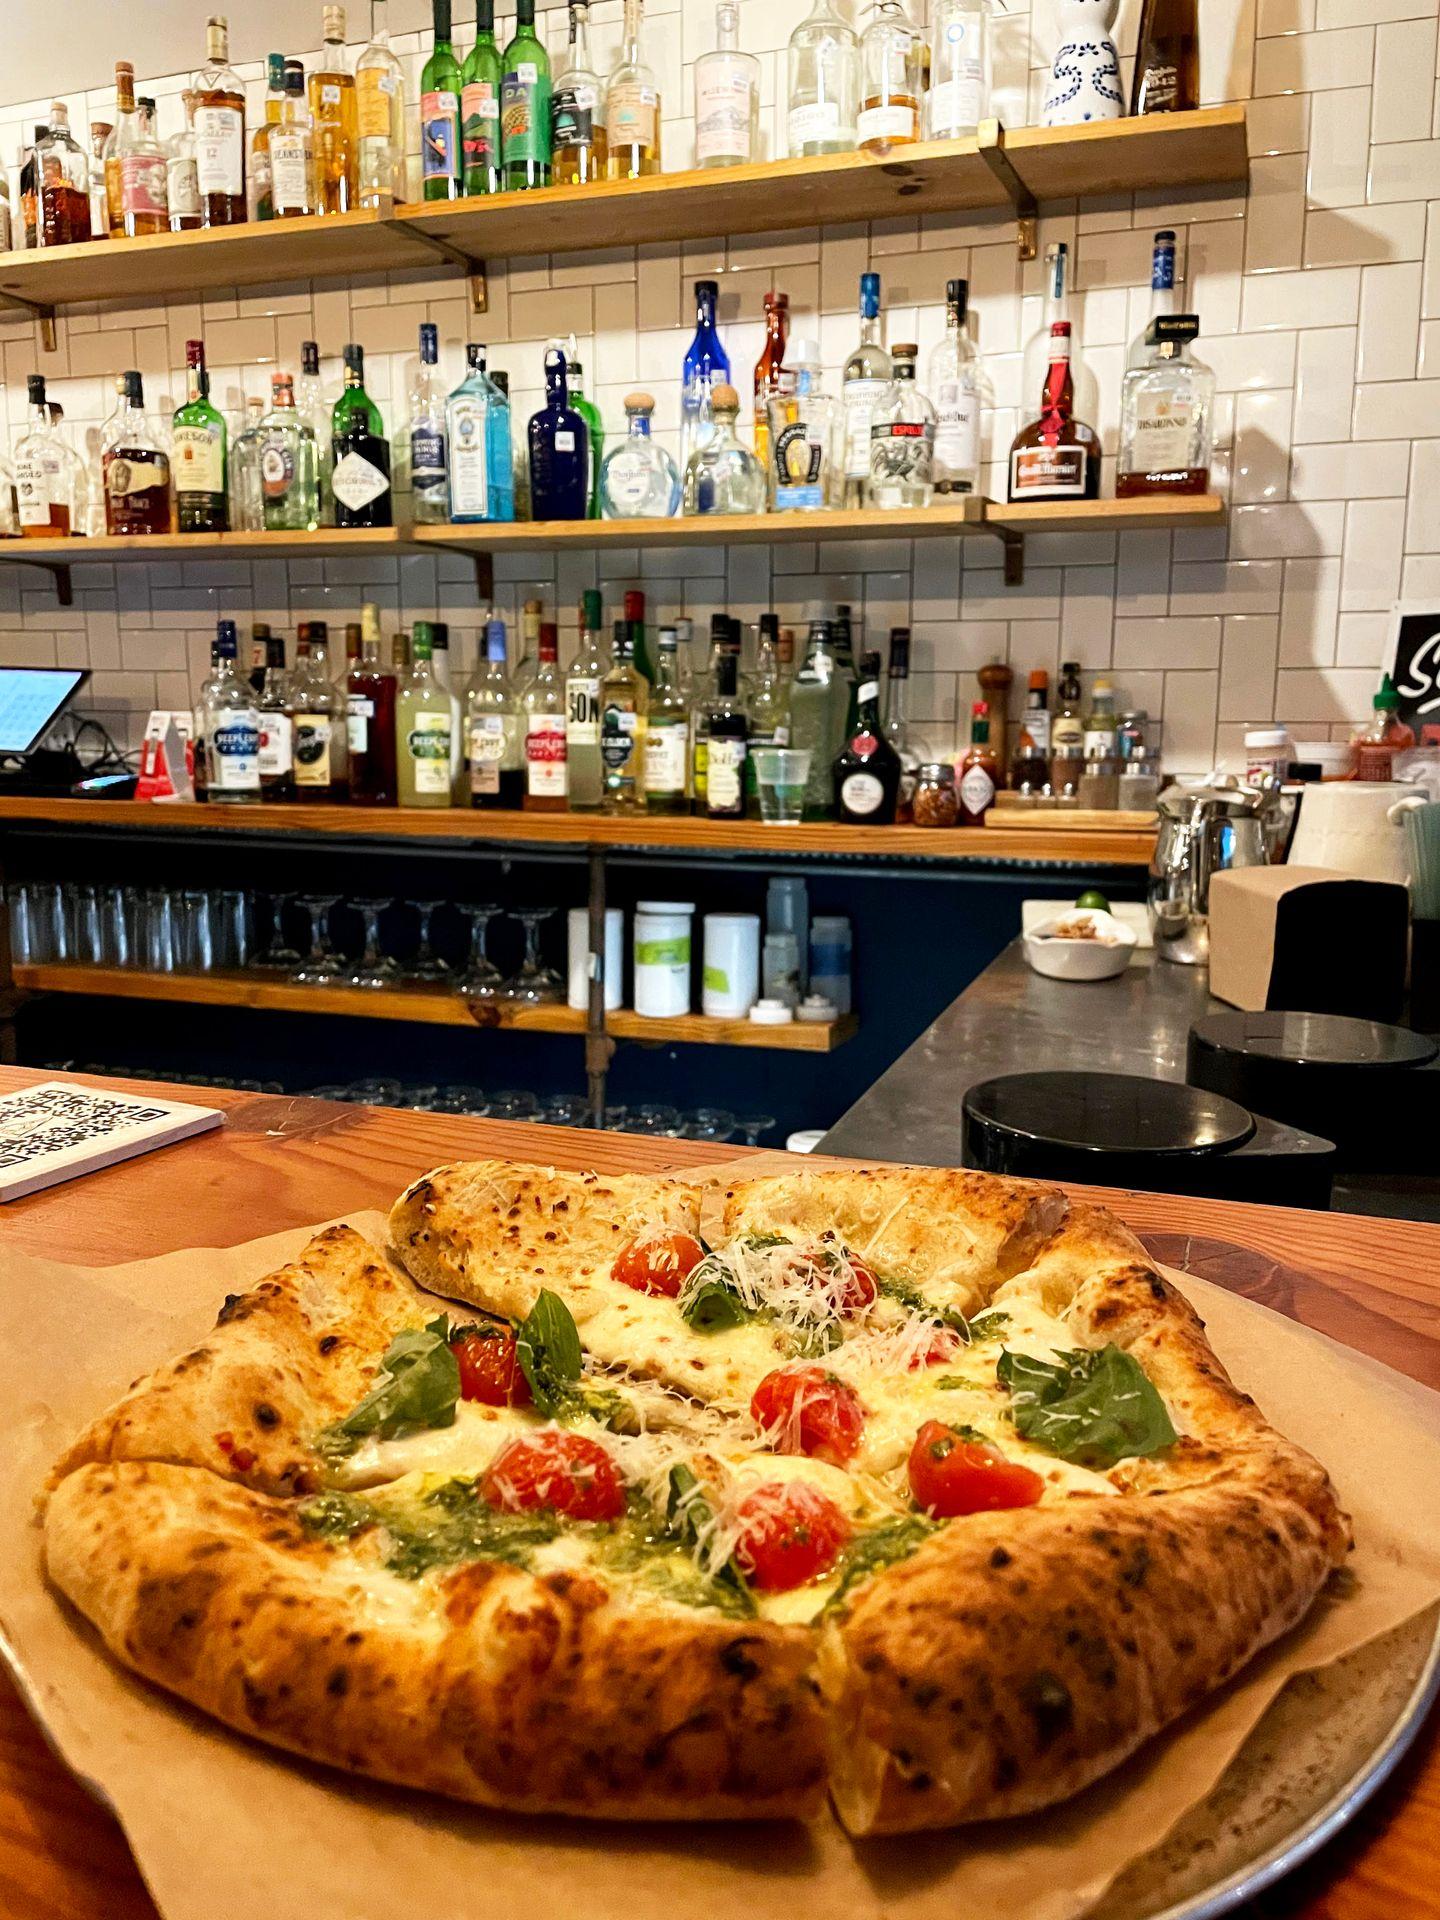 A small pizza topped with cherry tomatoes at Community Pizza and Beer Garden.